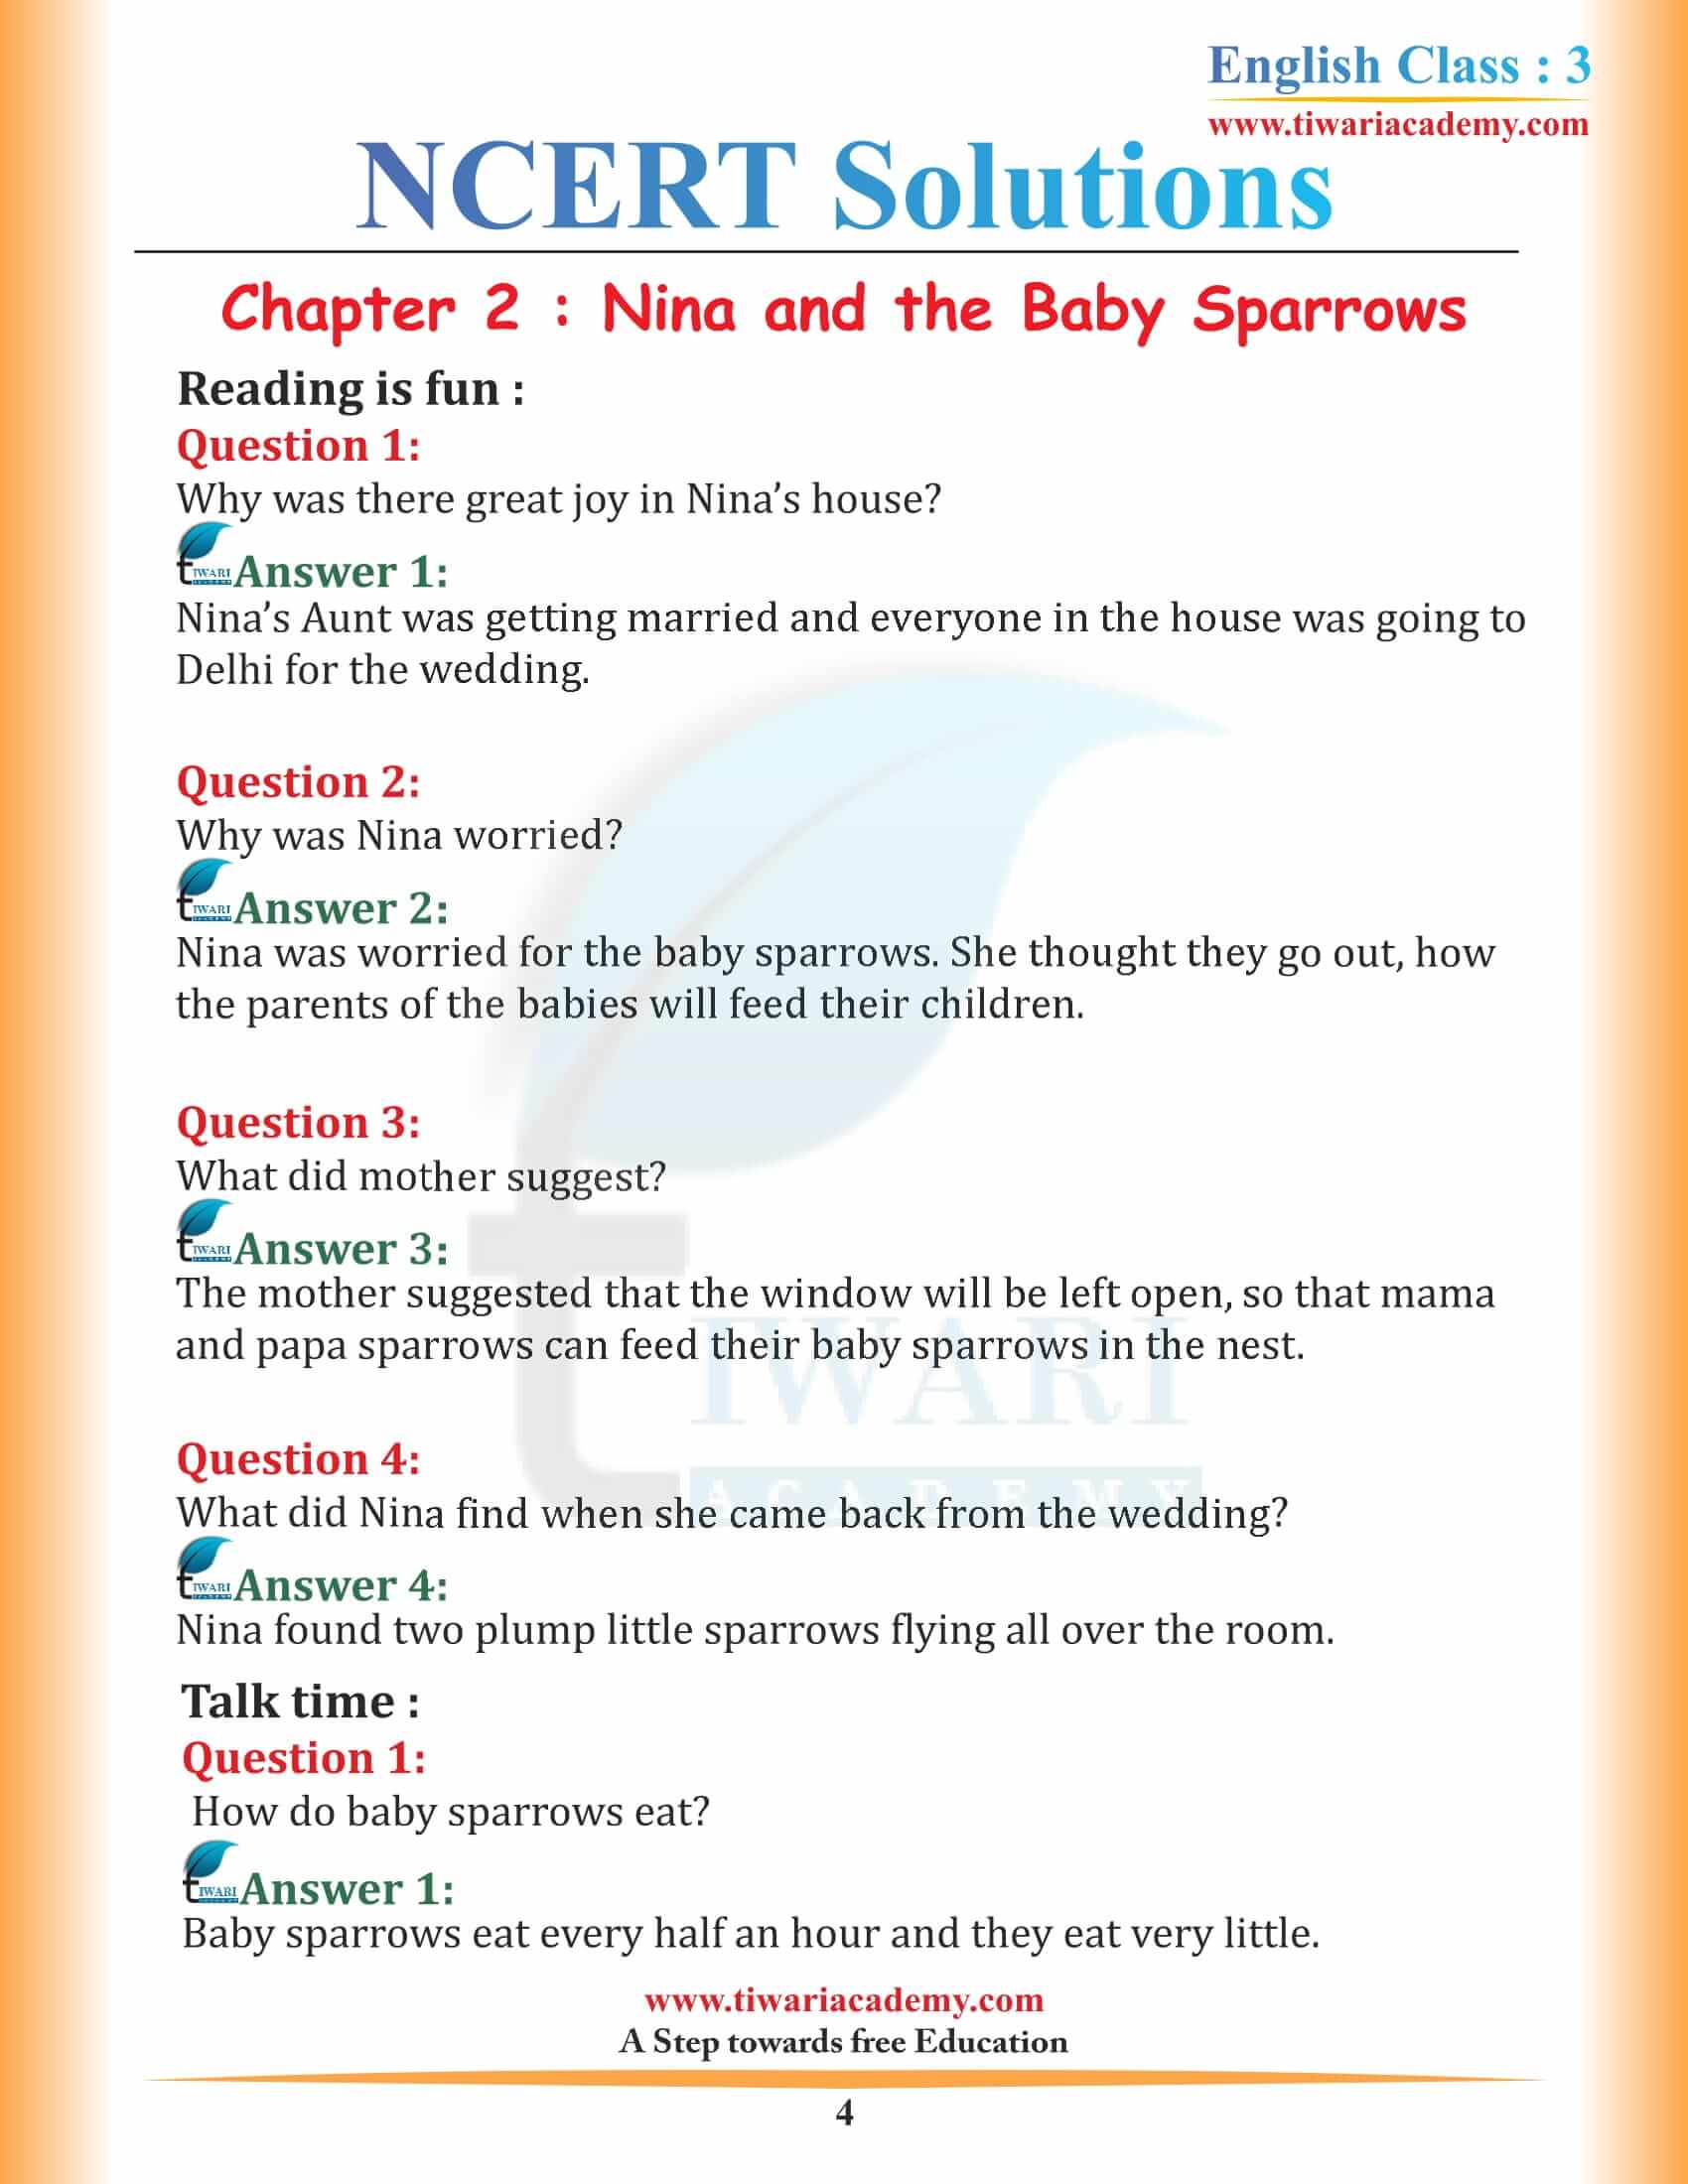 NCERT Solutions for Class 3 English Unit 2